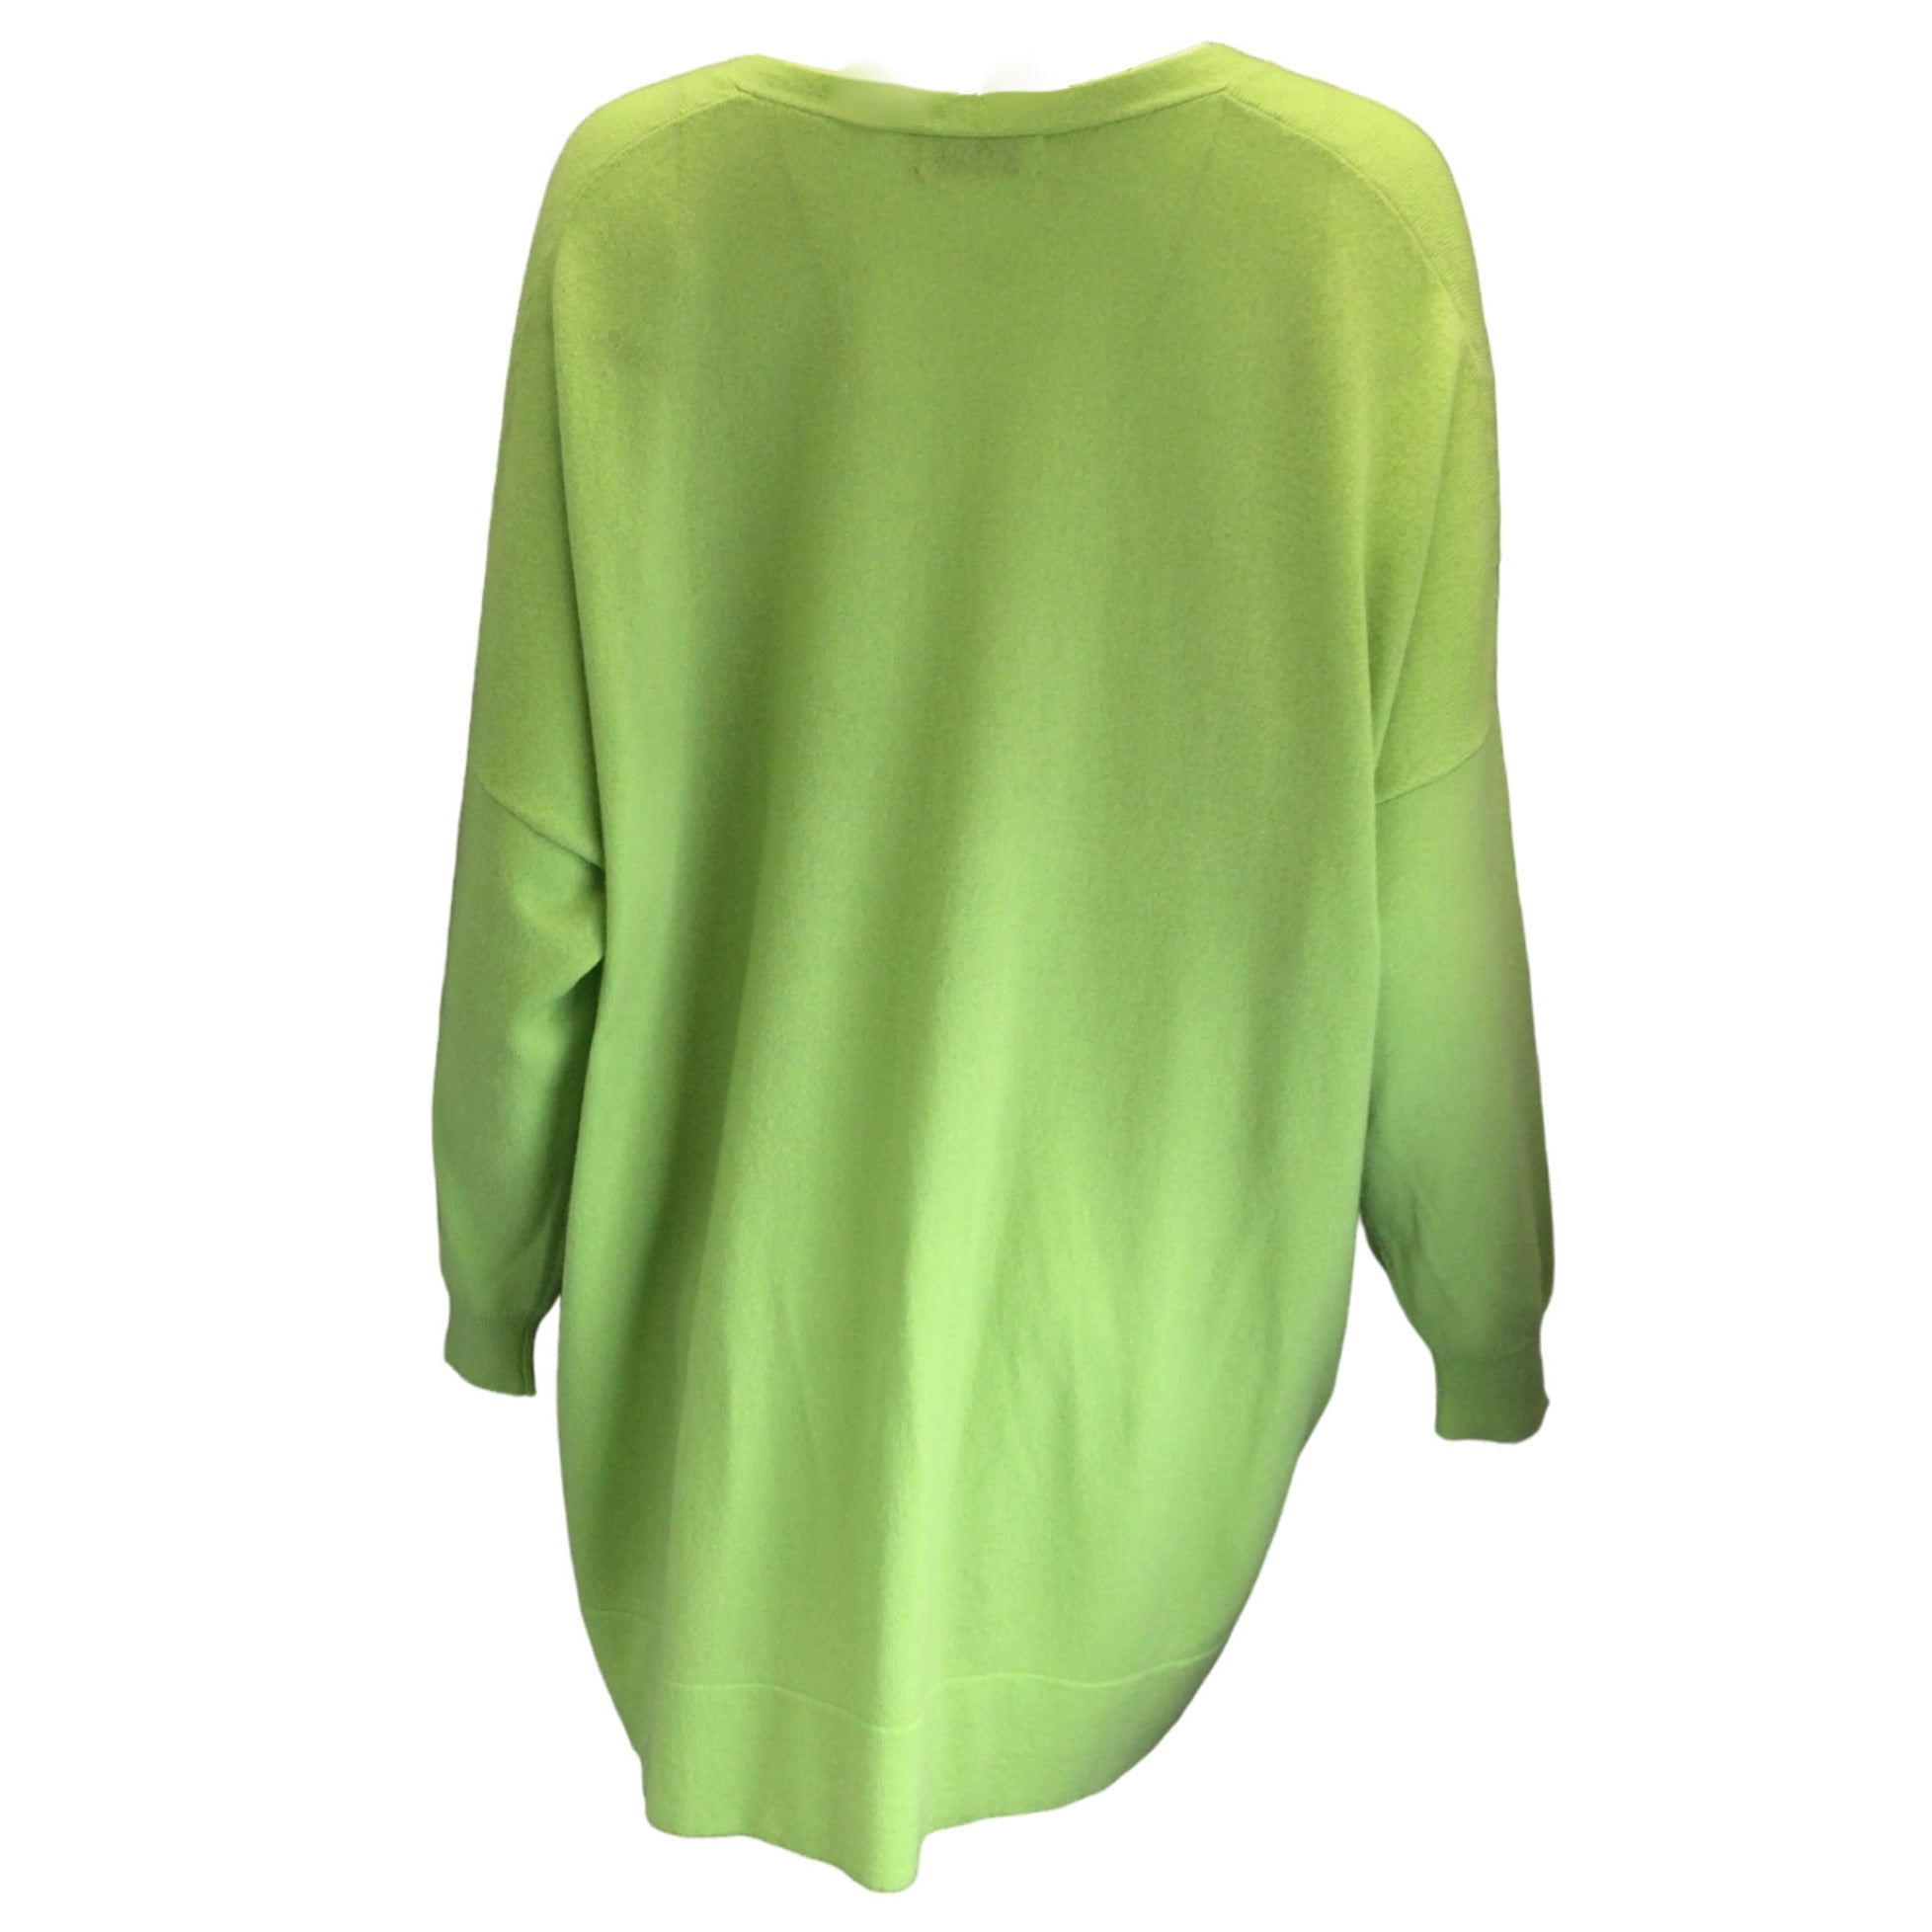 Michael Gabriel Lime Green Avatar Knit Oversized Long Sleeved Cashmere Button-down Cardigan Sweater